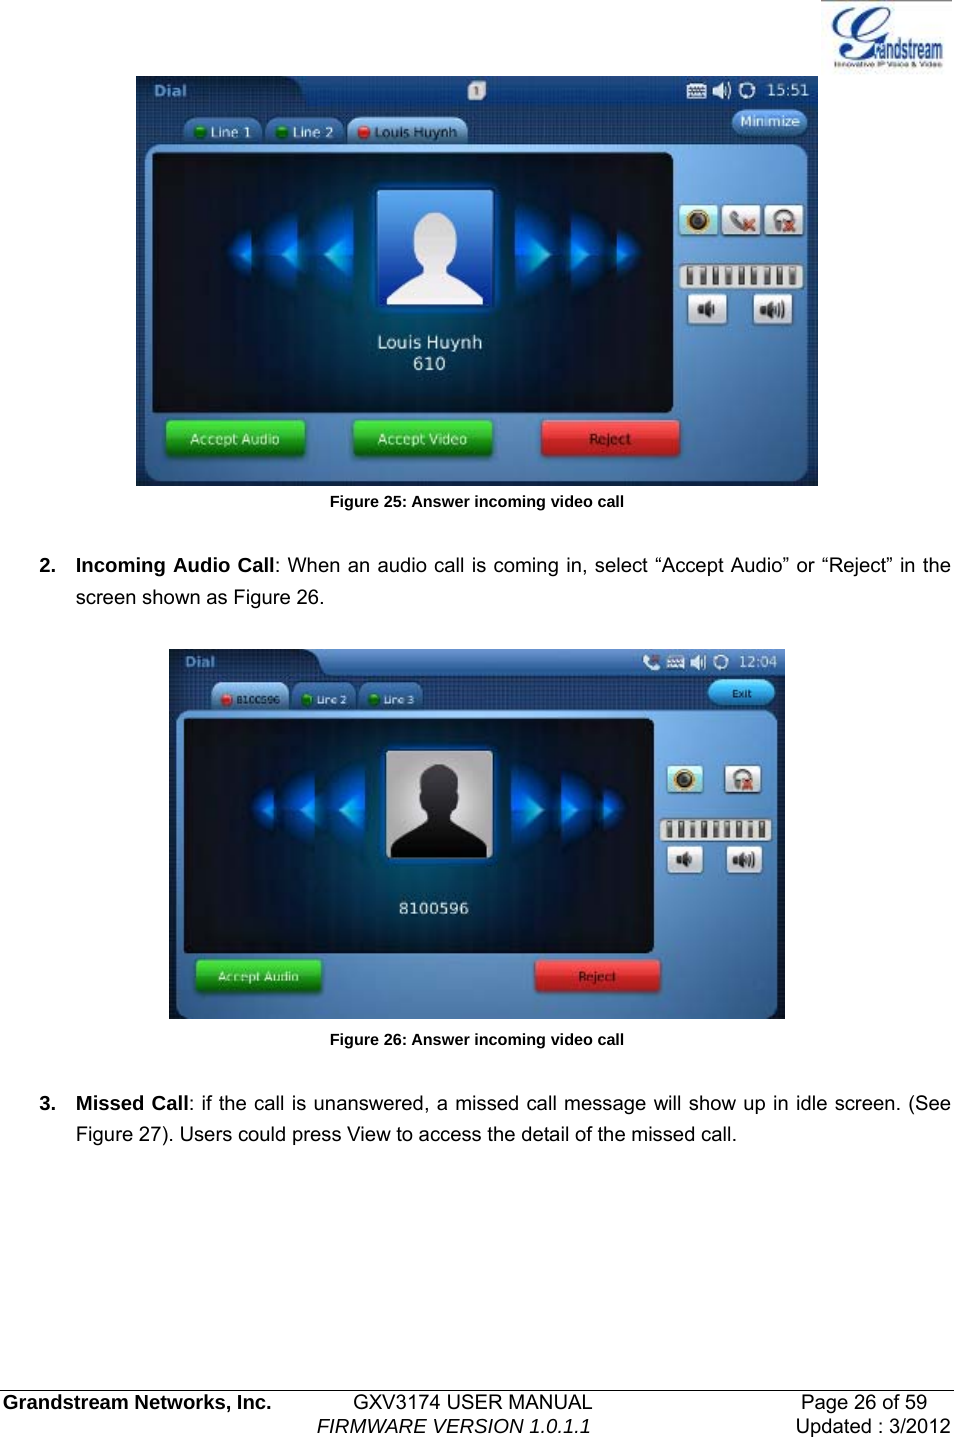   Grandstream Networks, Inc.        GXV3174 USER MANUAL                     Page 26 of 59                                FIRMWARE VERSION 1.0.1.1  Updated : 3/2012   Figure 25: Answer incoming video call  2. Incoming Audio Call: When an audio call is coming in, select “Accept Audio” or “Reject” in the screen shown as Figure 26.    Figure 26: Answer incoming video call  3. Missed Call: if the call is unanswered, a missed call message will show up in idle screen. (See Figure 27). Users could press View to access the detail of the missed call. 